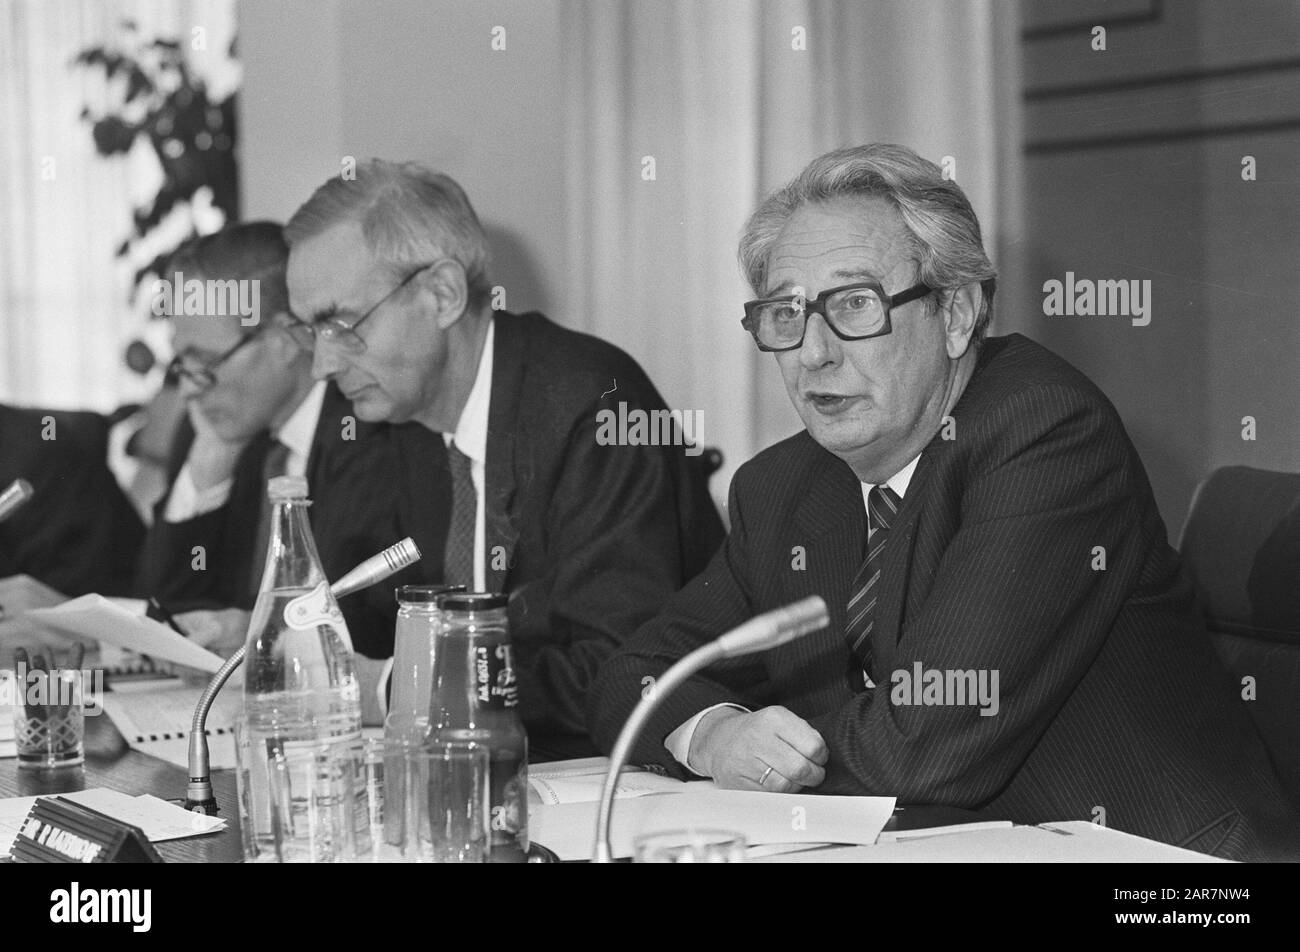 Presence annual figures ABN-bank, chairman of the RvB drs. R. Hazelhoff, commissioned Financieel Dagblad Date: March 6, 1987 Keywords: chairmen Personal name: Drs. R. Hazelhoff Institutional name: Financieel Dagblad Stock Photo